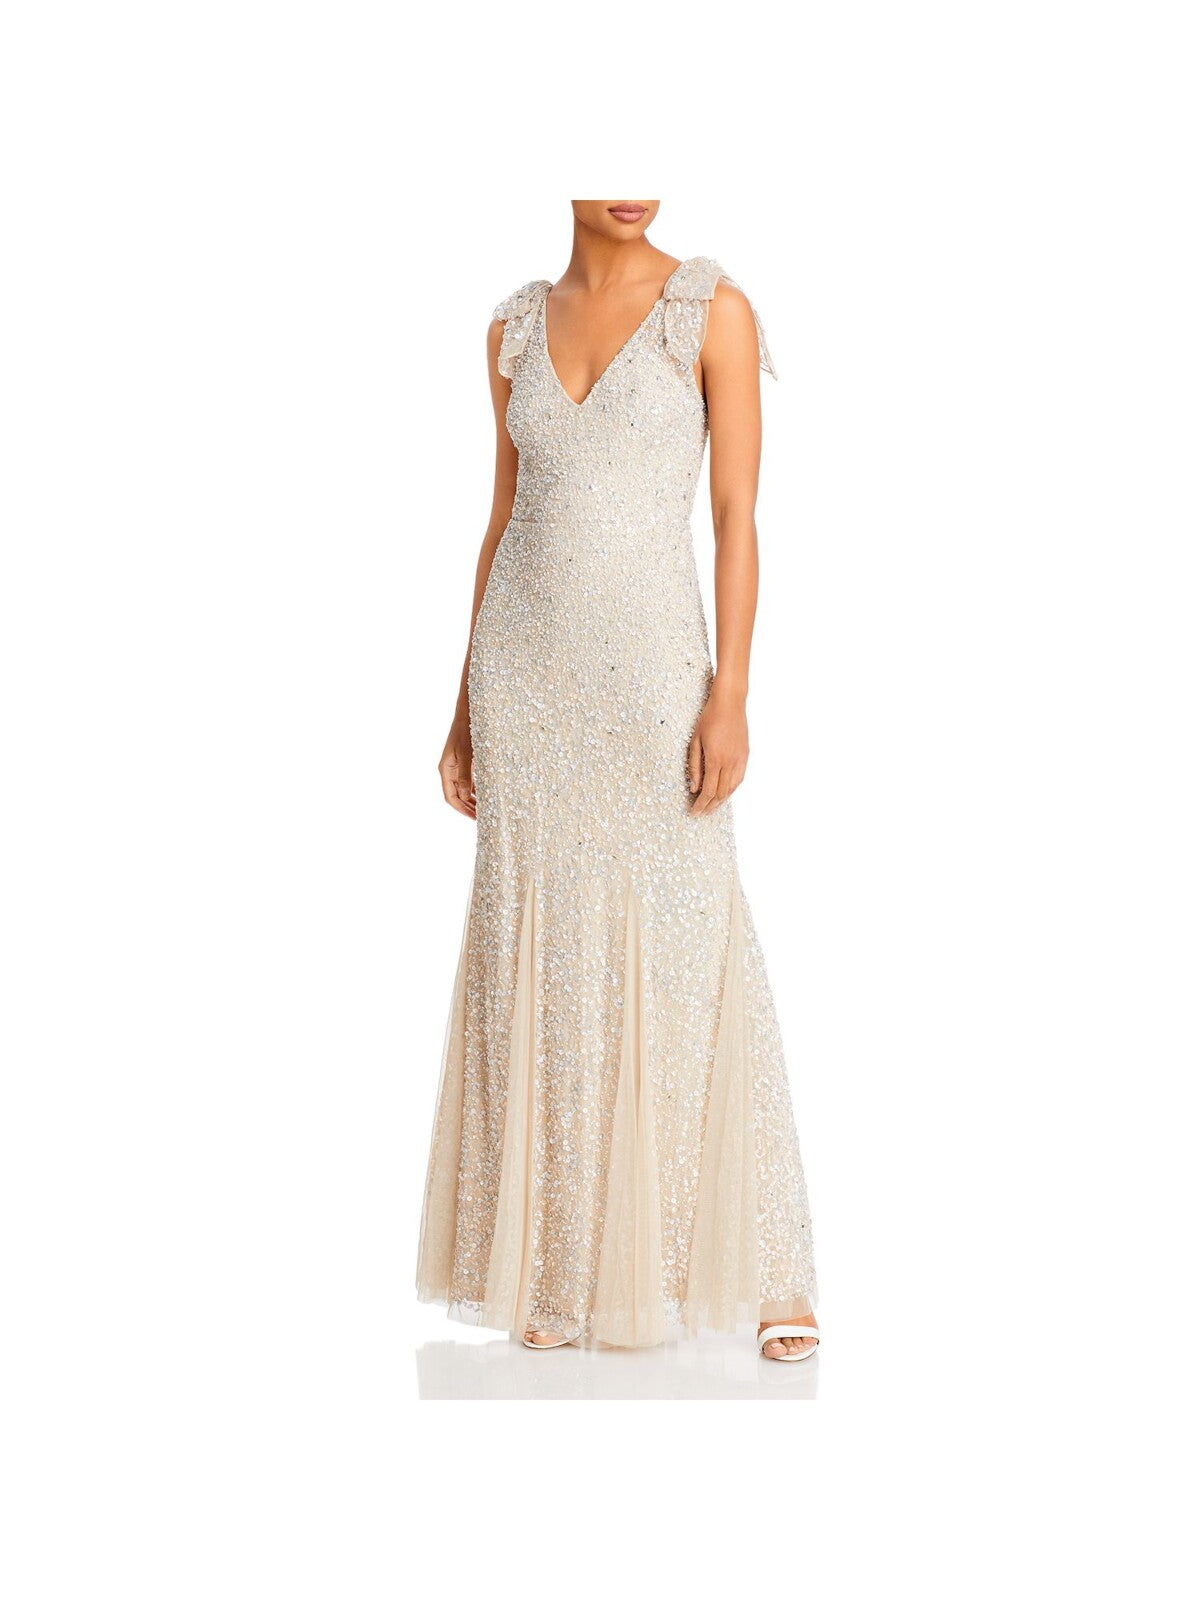 AIDAN MATTOX Womens Beige Beaded Sequined Double V-neck With Bows Sleeveless Full-Length Formal Gown Dress 4